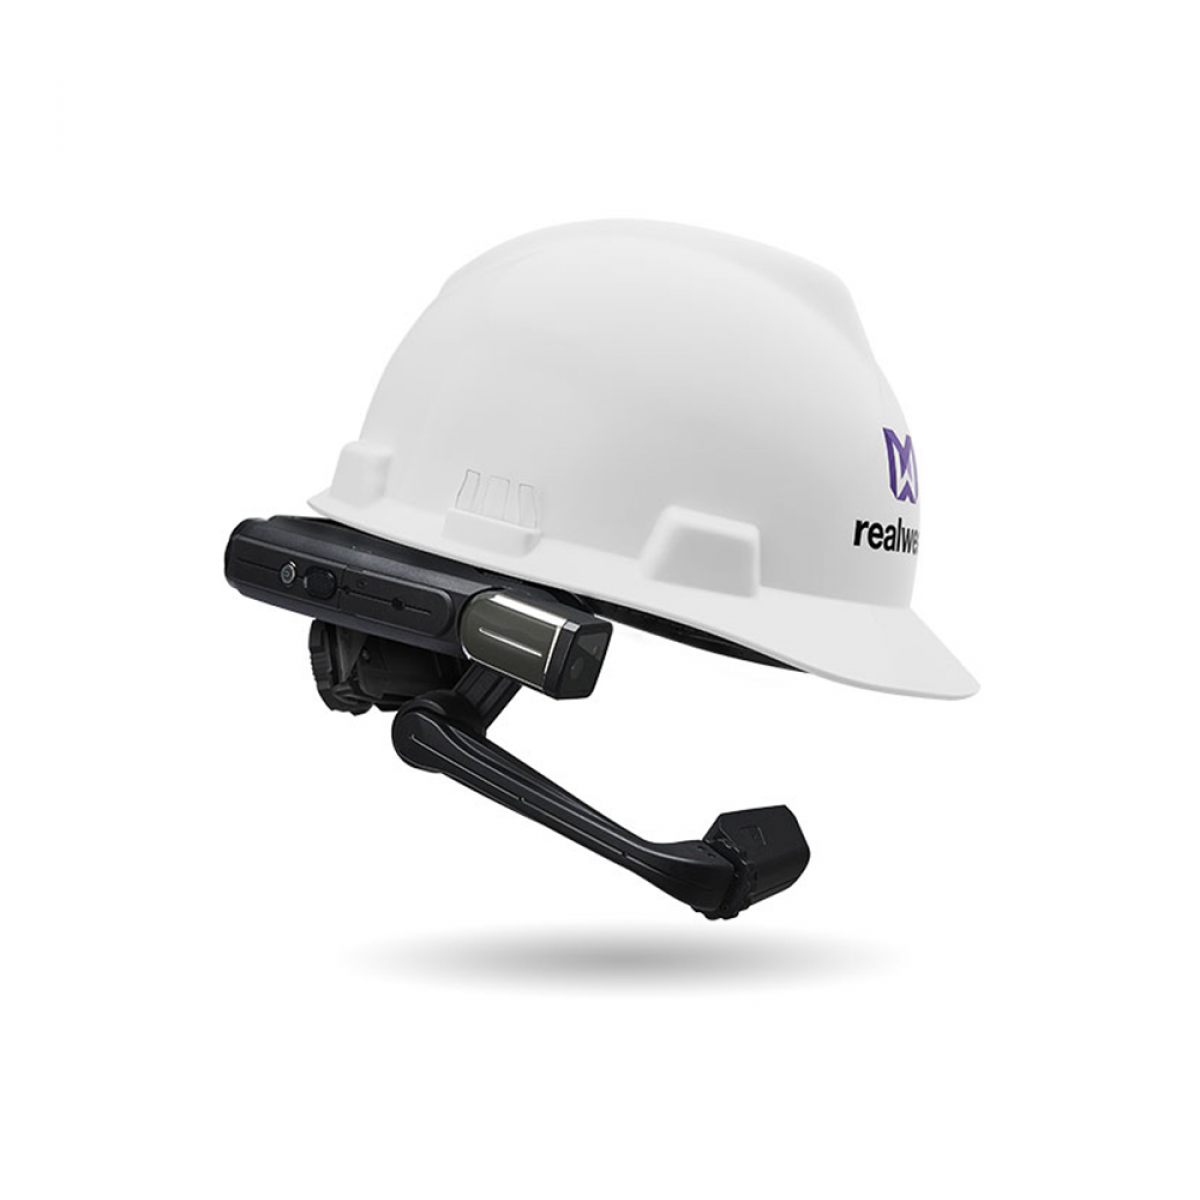 RealWear HMT 1 - Voice-enabled and PPE compatible device